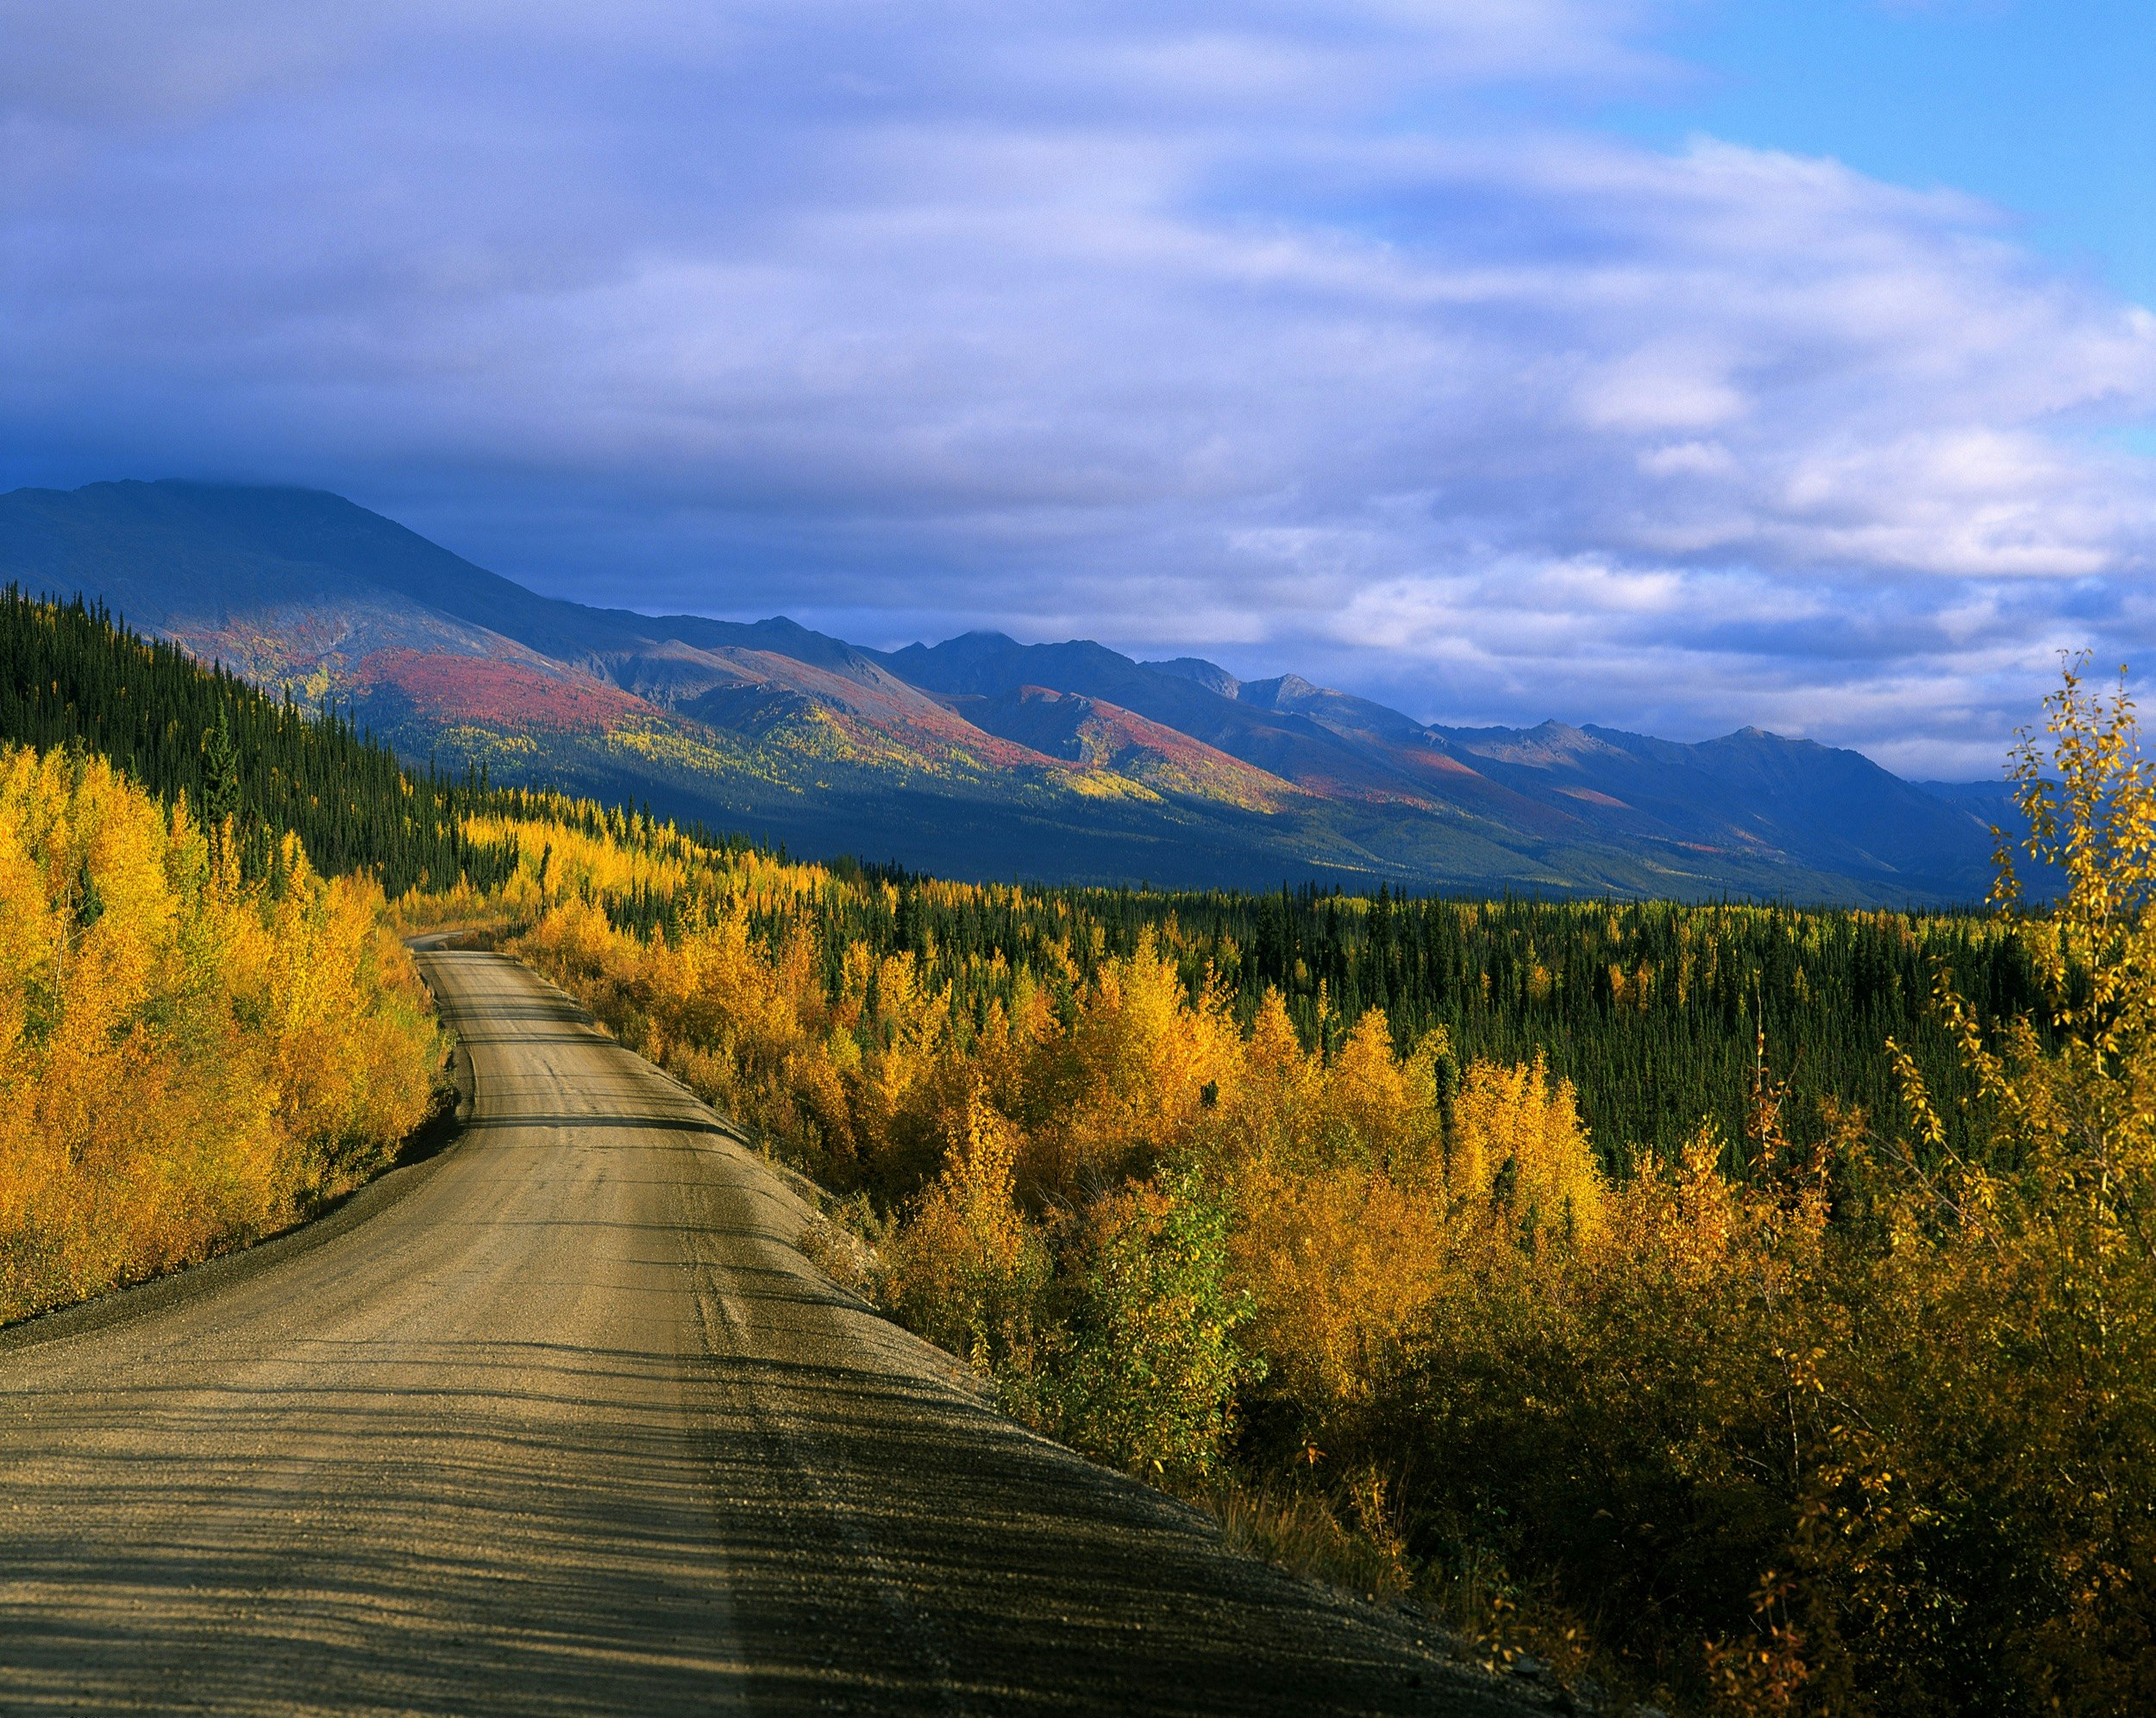 Golden leaves dominate the forests on the edges of a gray shale road as a sunbeam highlights russet, crimson and orange hues on a set of mountains in the distance